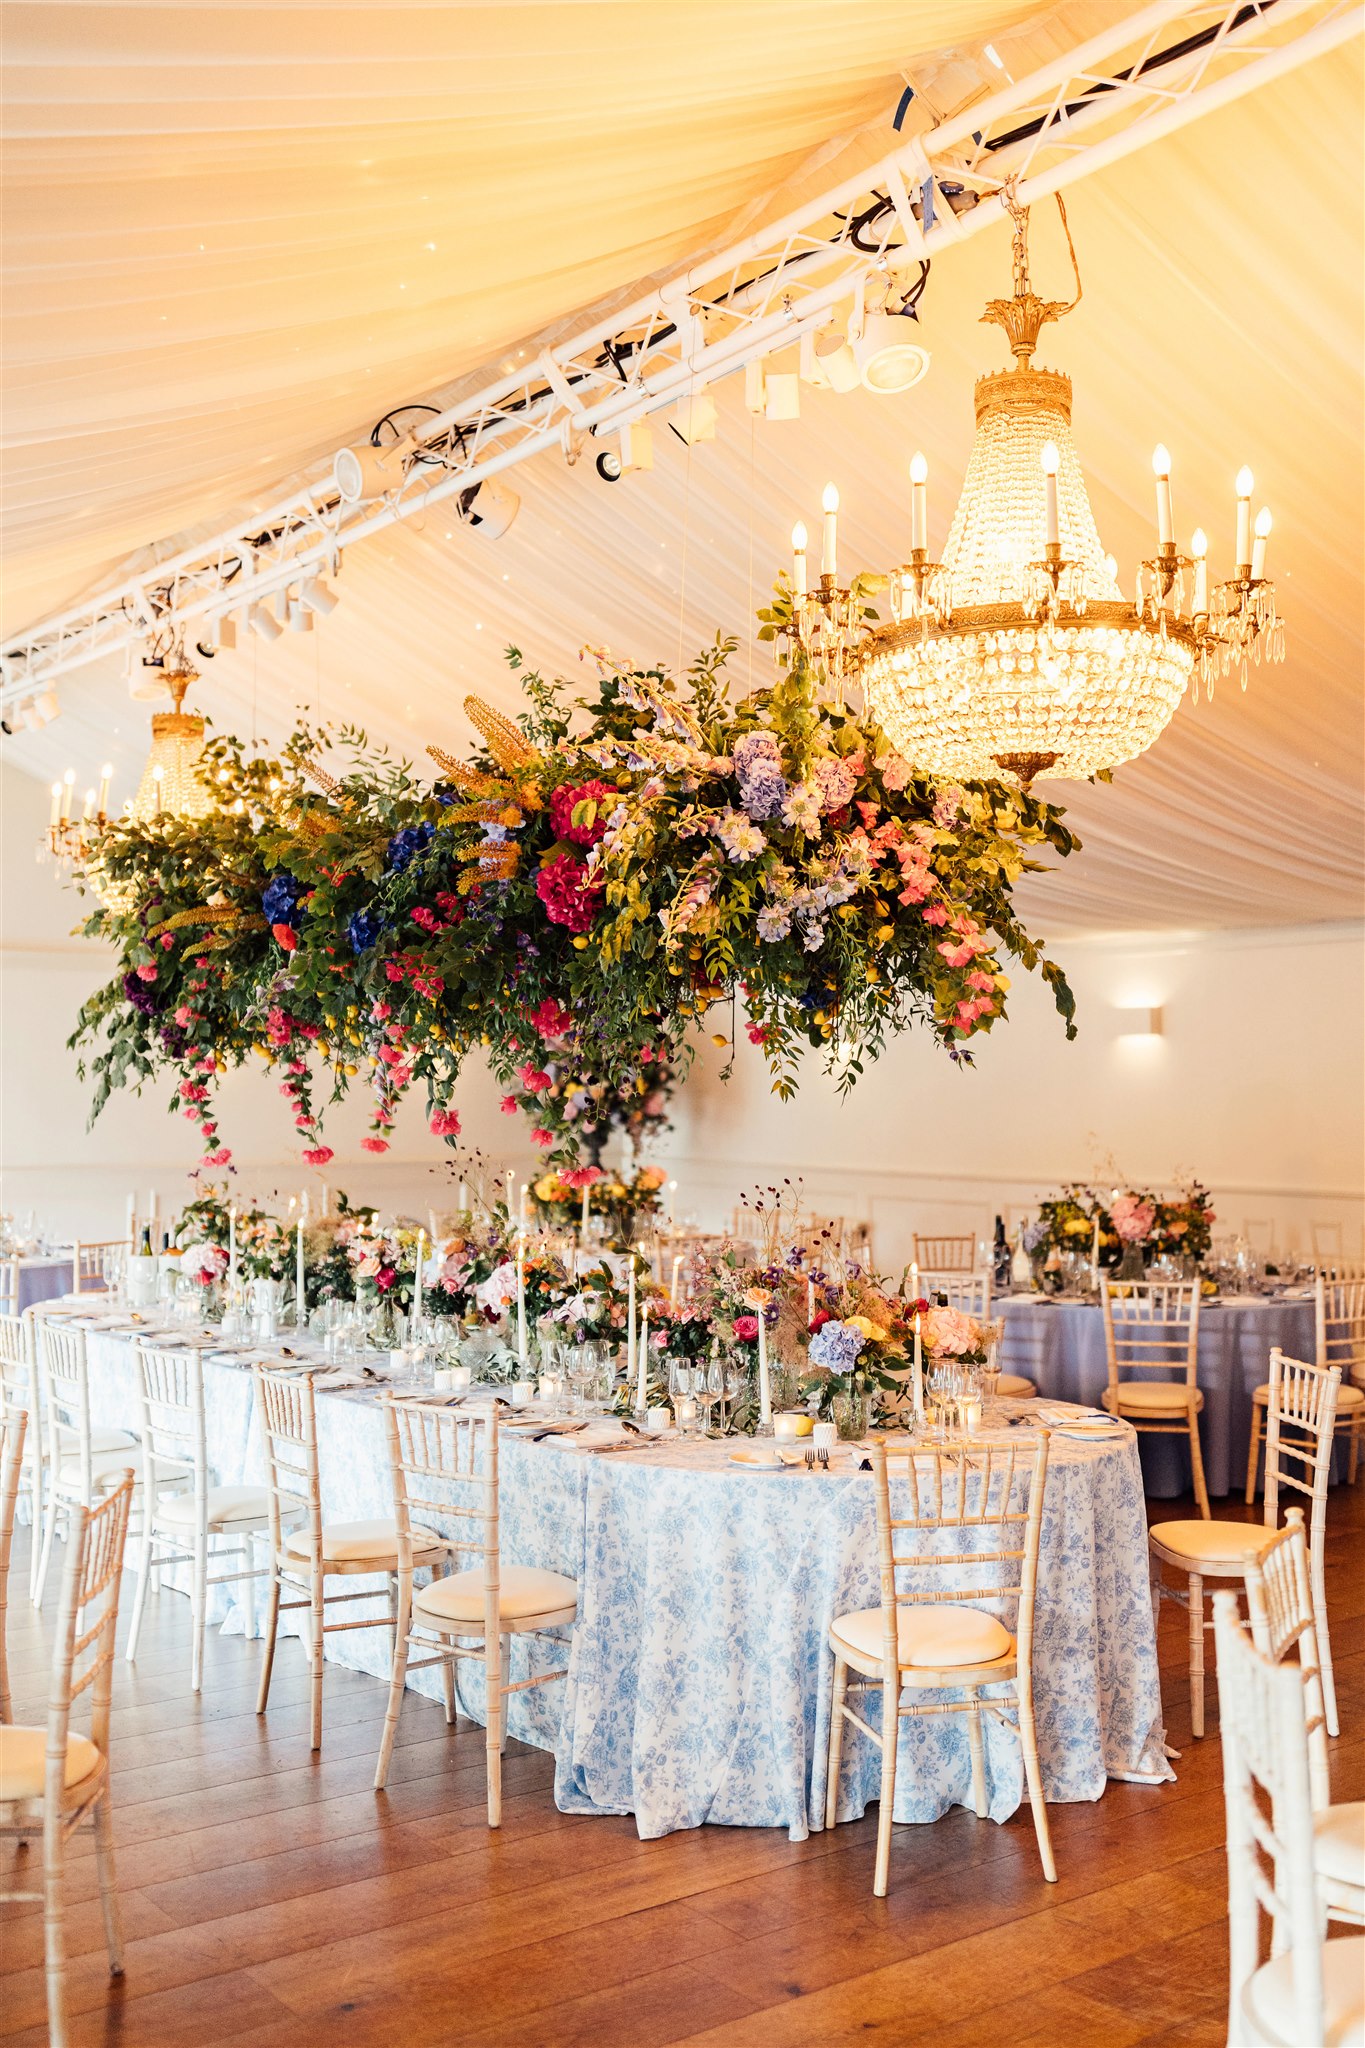 A huge crystal chandelier is suspended from the ceiling of a wedding marquee next to a hanging floral arrangement filled with green foliage and pink, blue and lilac tones. Underneath is an oval table with a blue toile tablecloth on which are more flowers and cream lit candles.